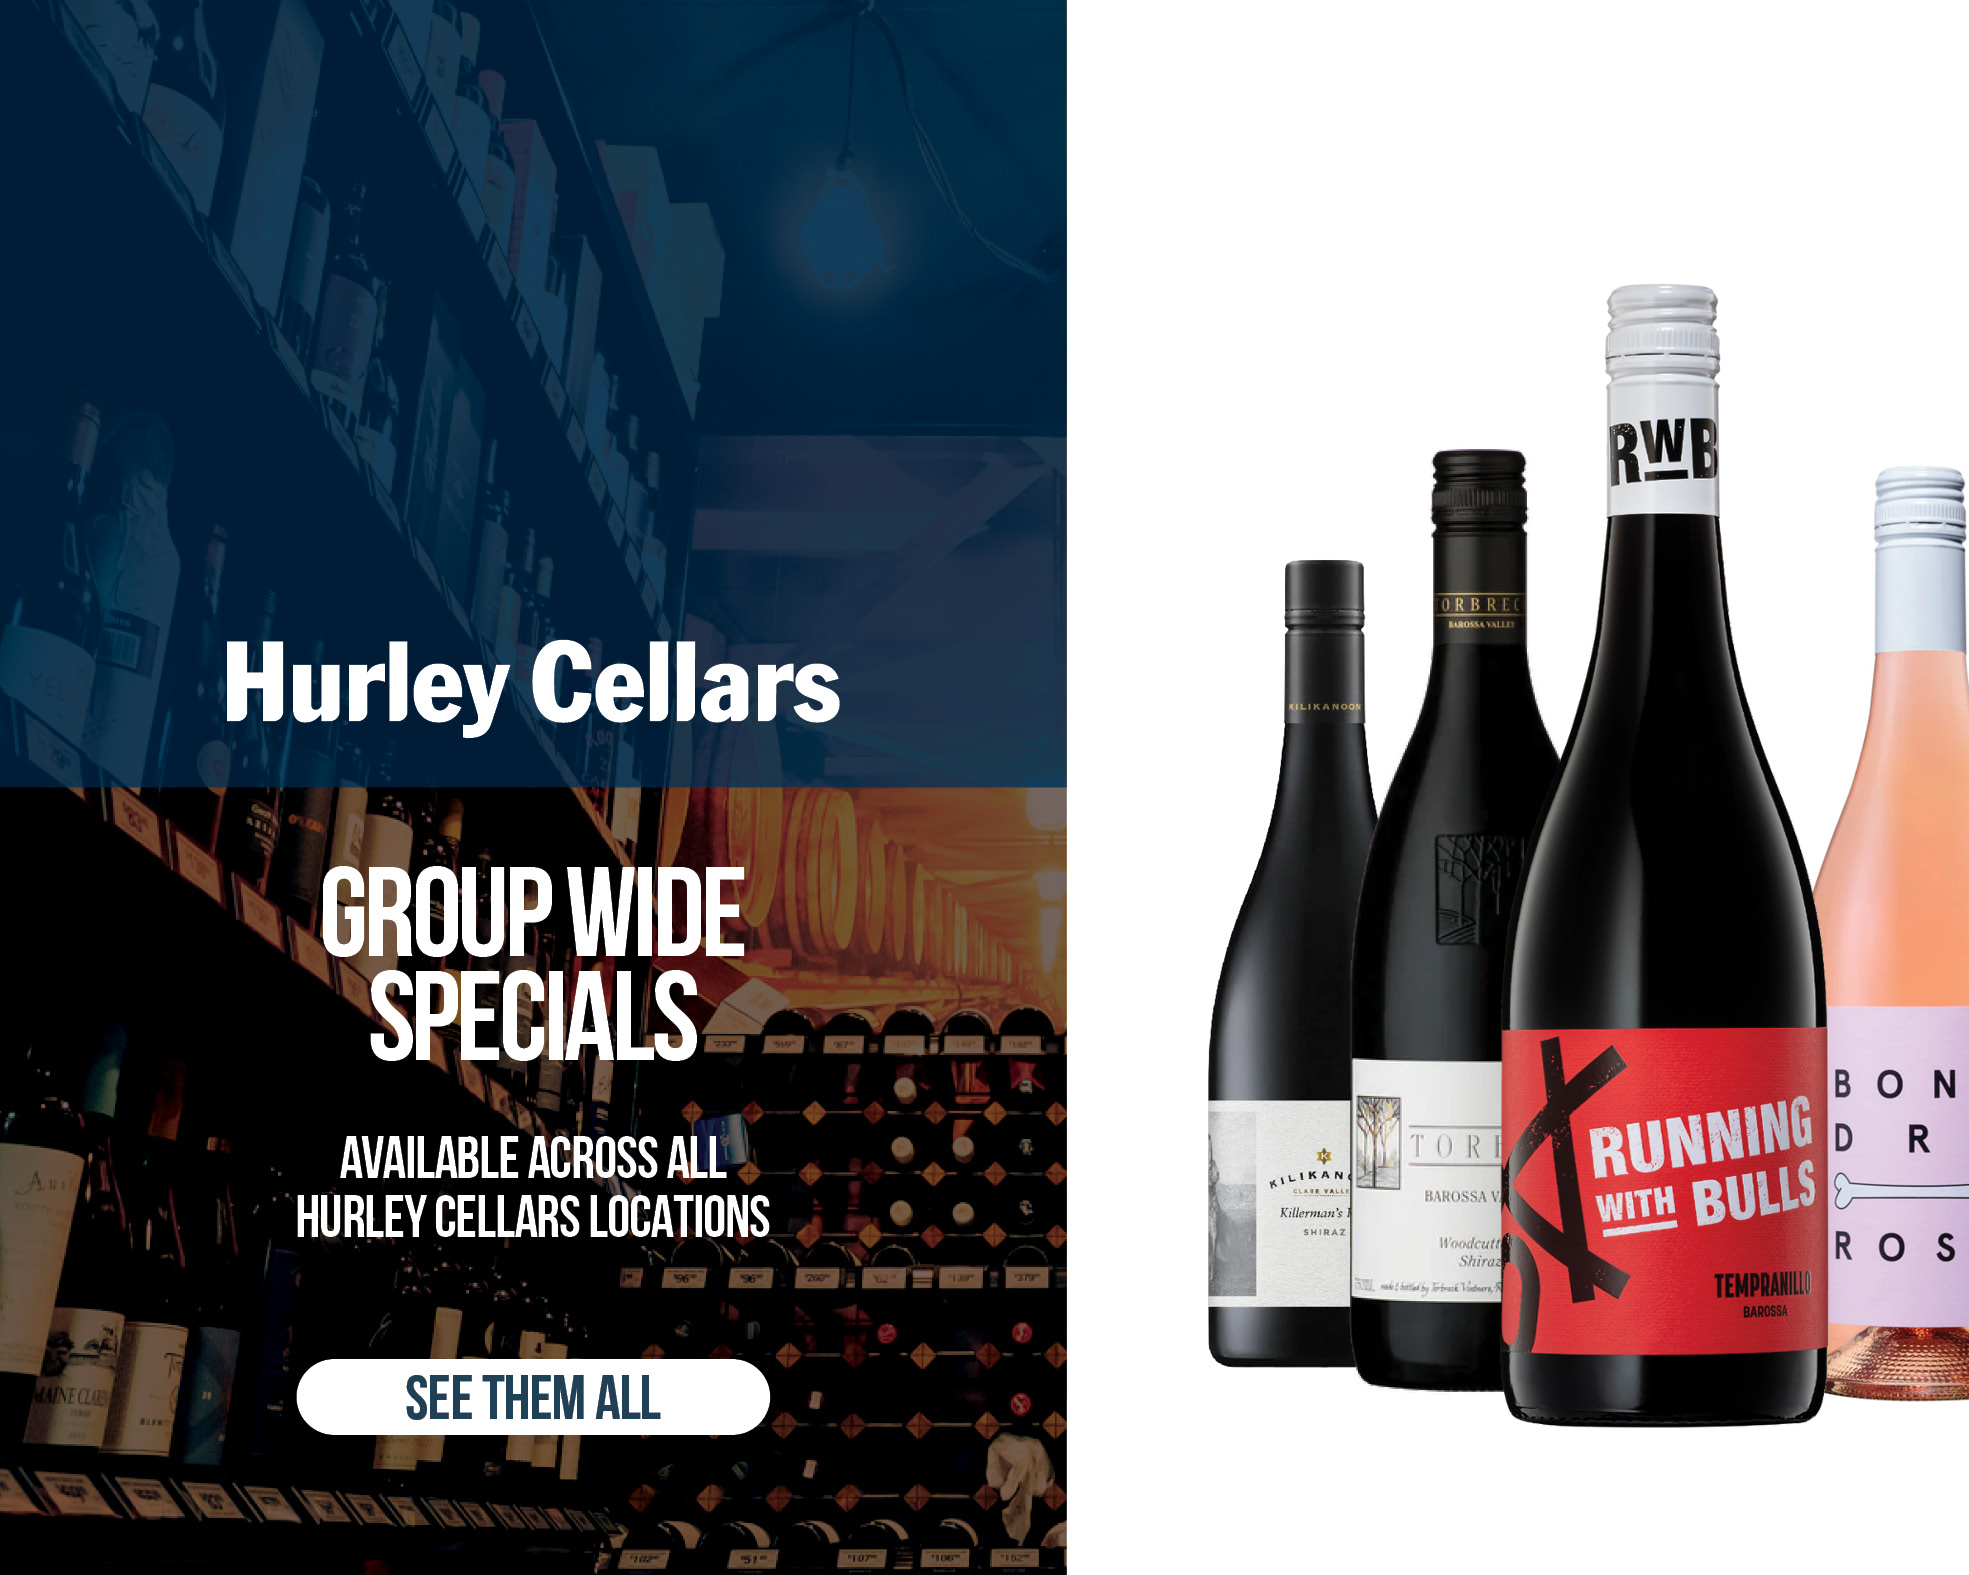 Hurley cellars group wide specials banner